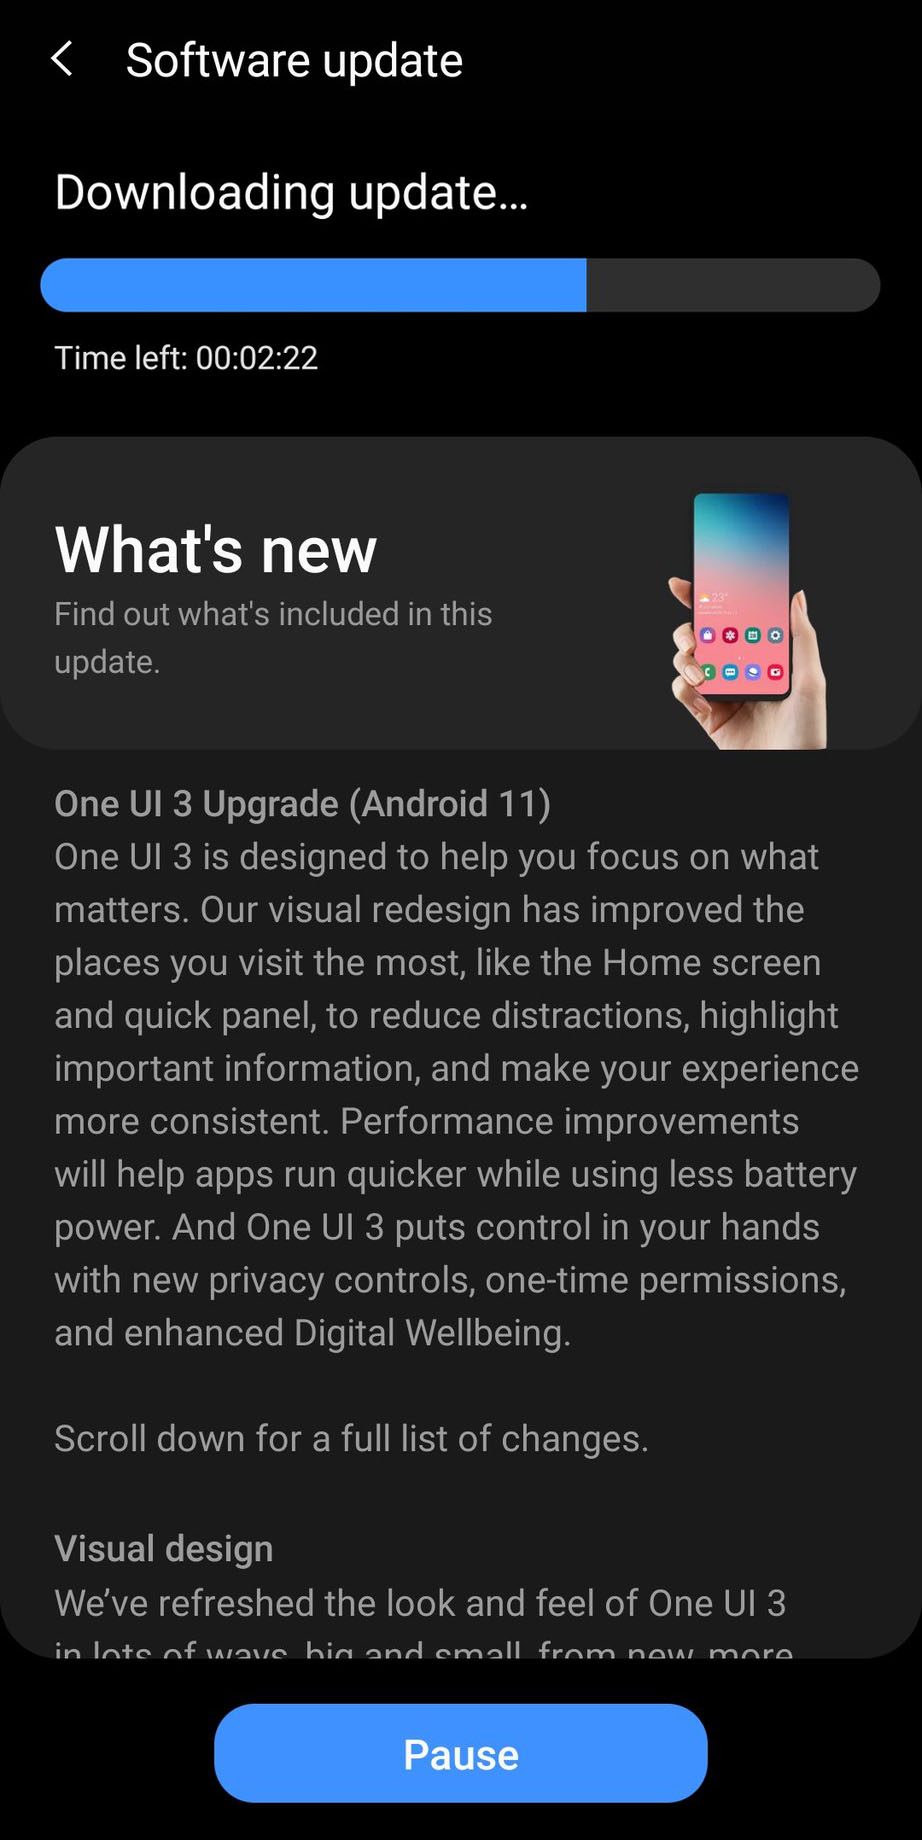 Galaxy S10 Lite receives Android 11 based One UI 3.0 update